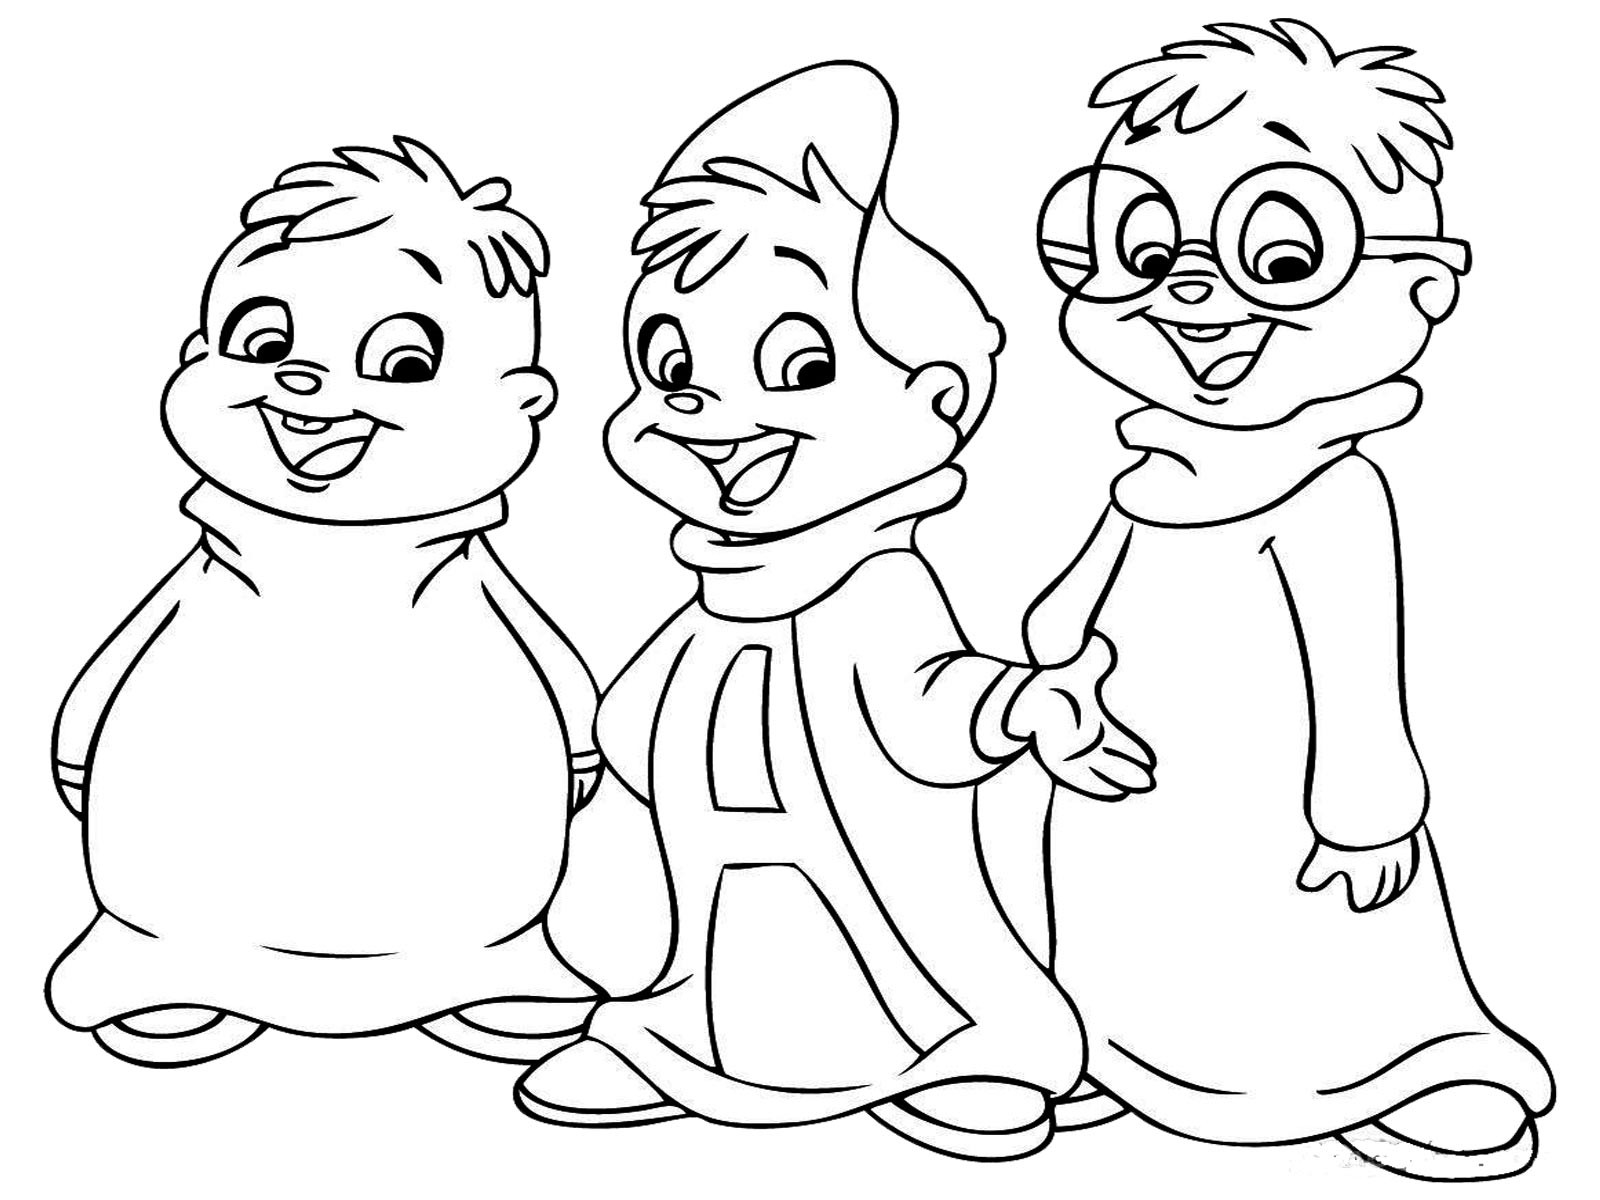 Best ideas about Coloring Pages For Boys With Boys
. Save or Pin Boys Coloring Pages Bestofcoloring Now.